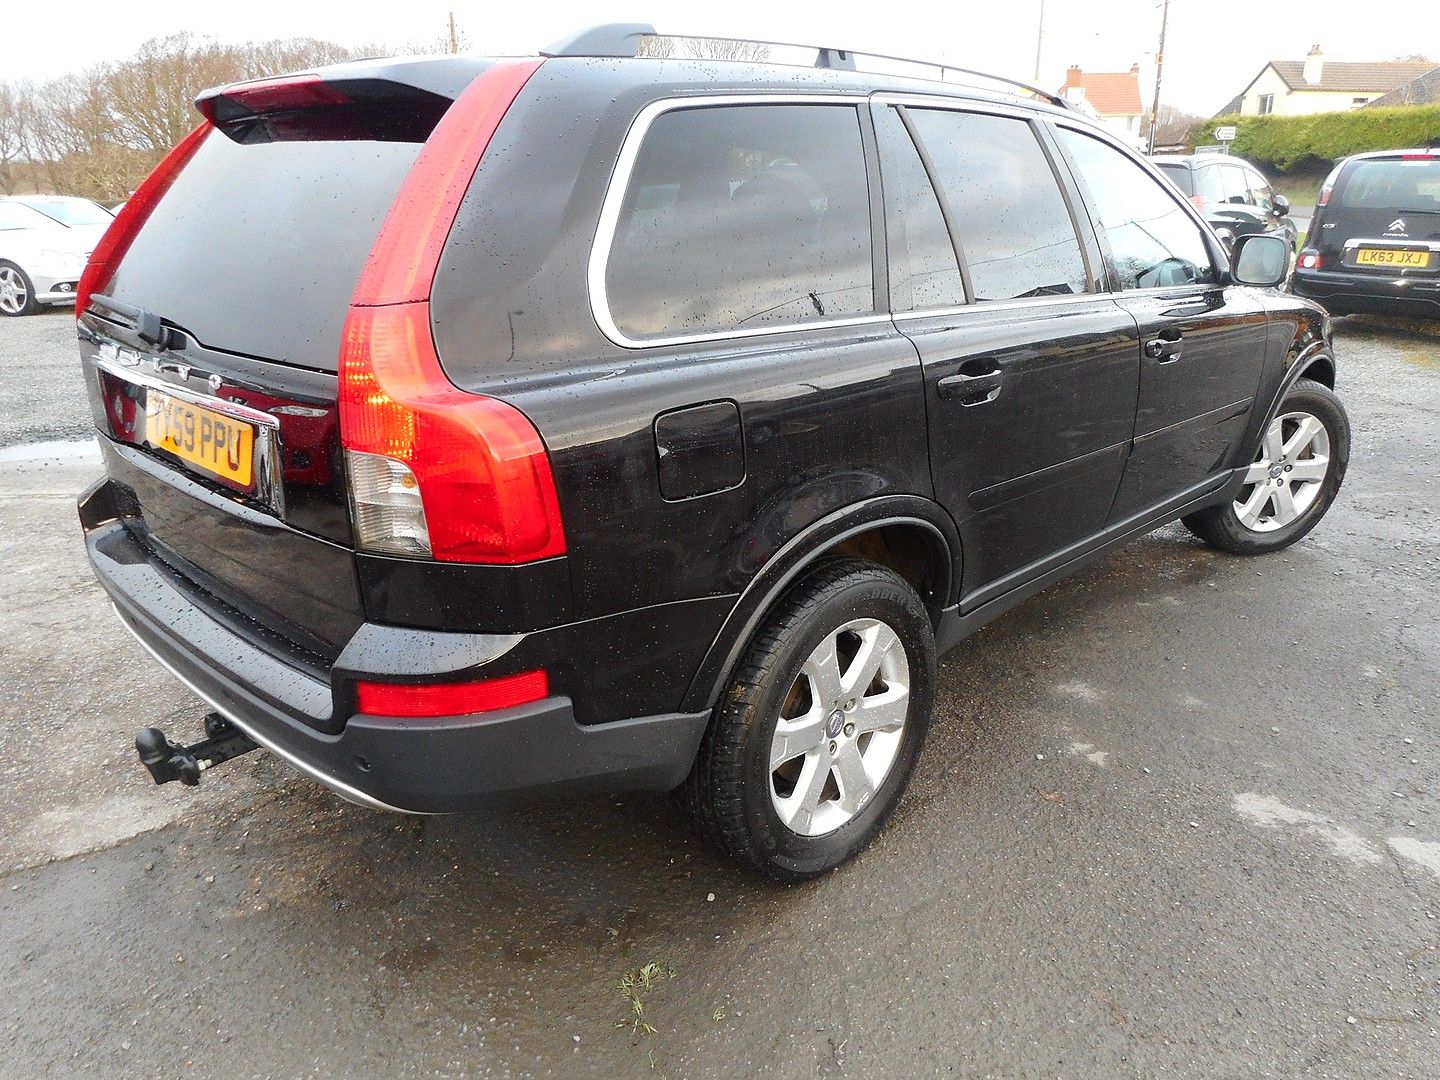 VOLVO XC90 D5 AWD (185 bhp) Executive Geartronic (2009) - Picture 3